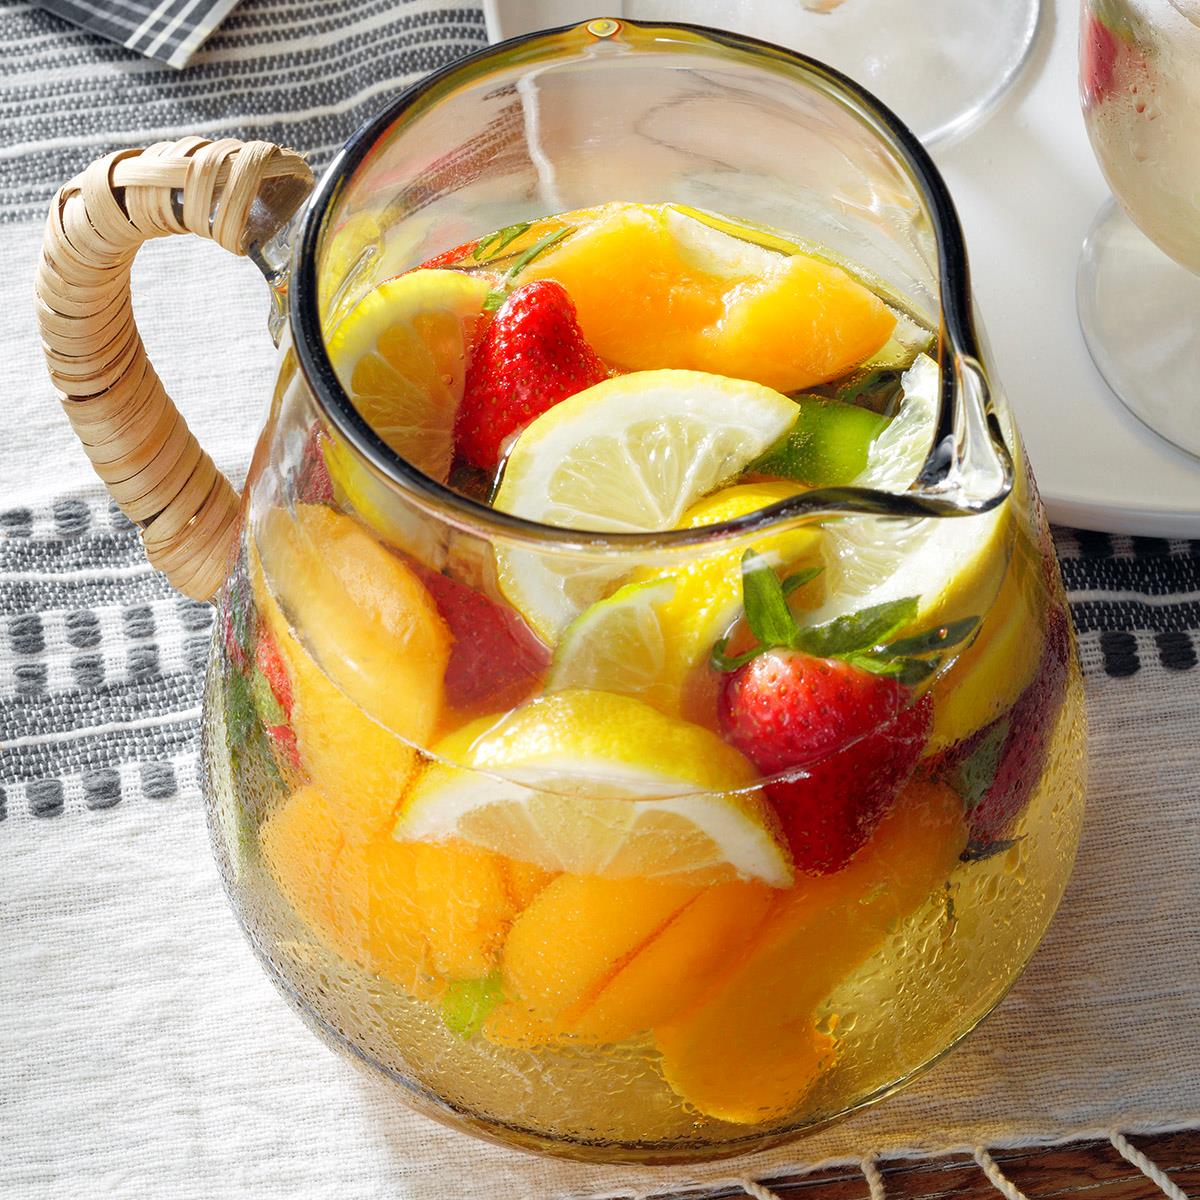 sangria recipe with vodka and white wine - Arlean Coon